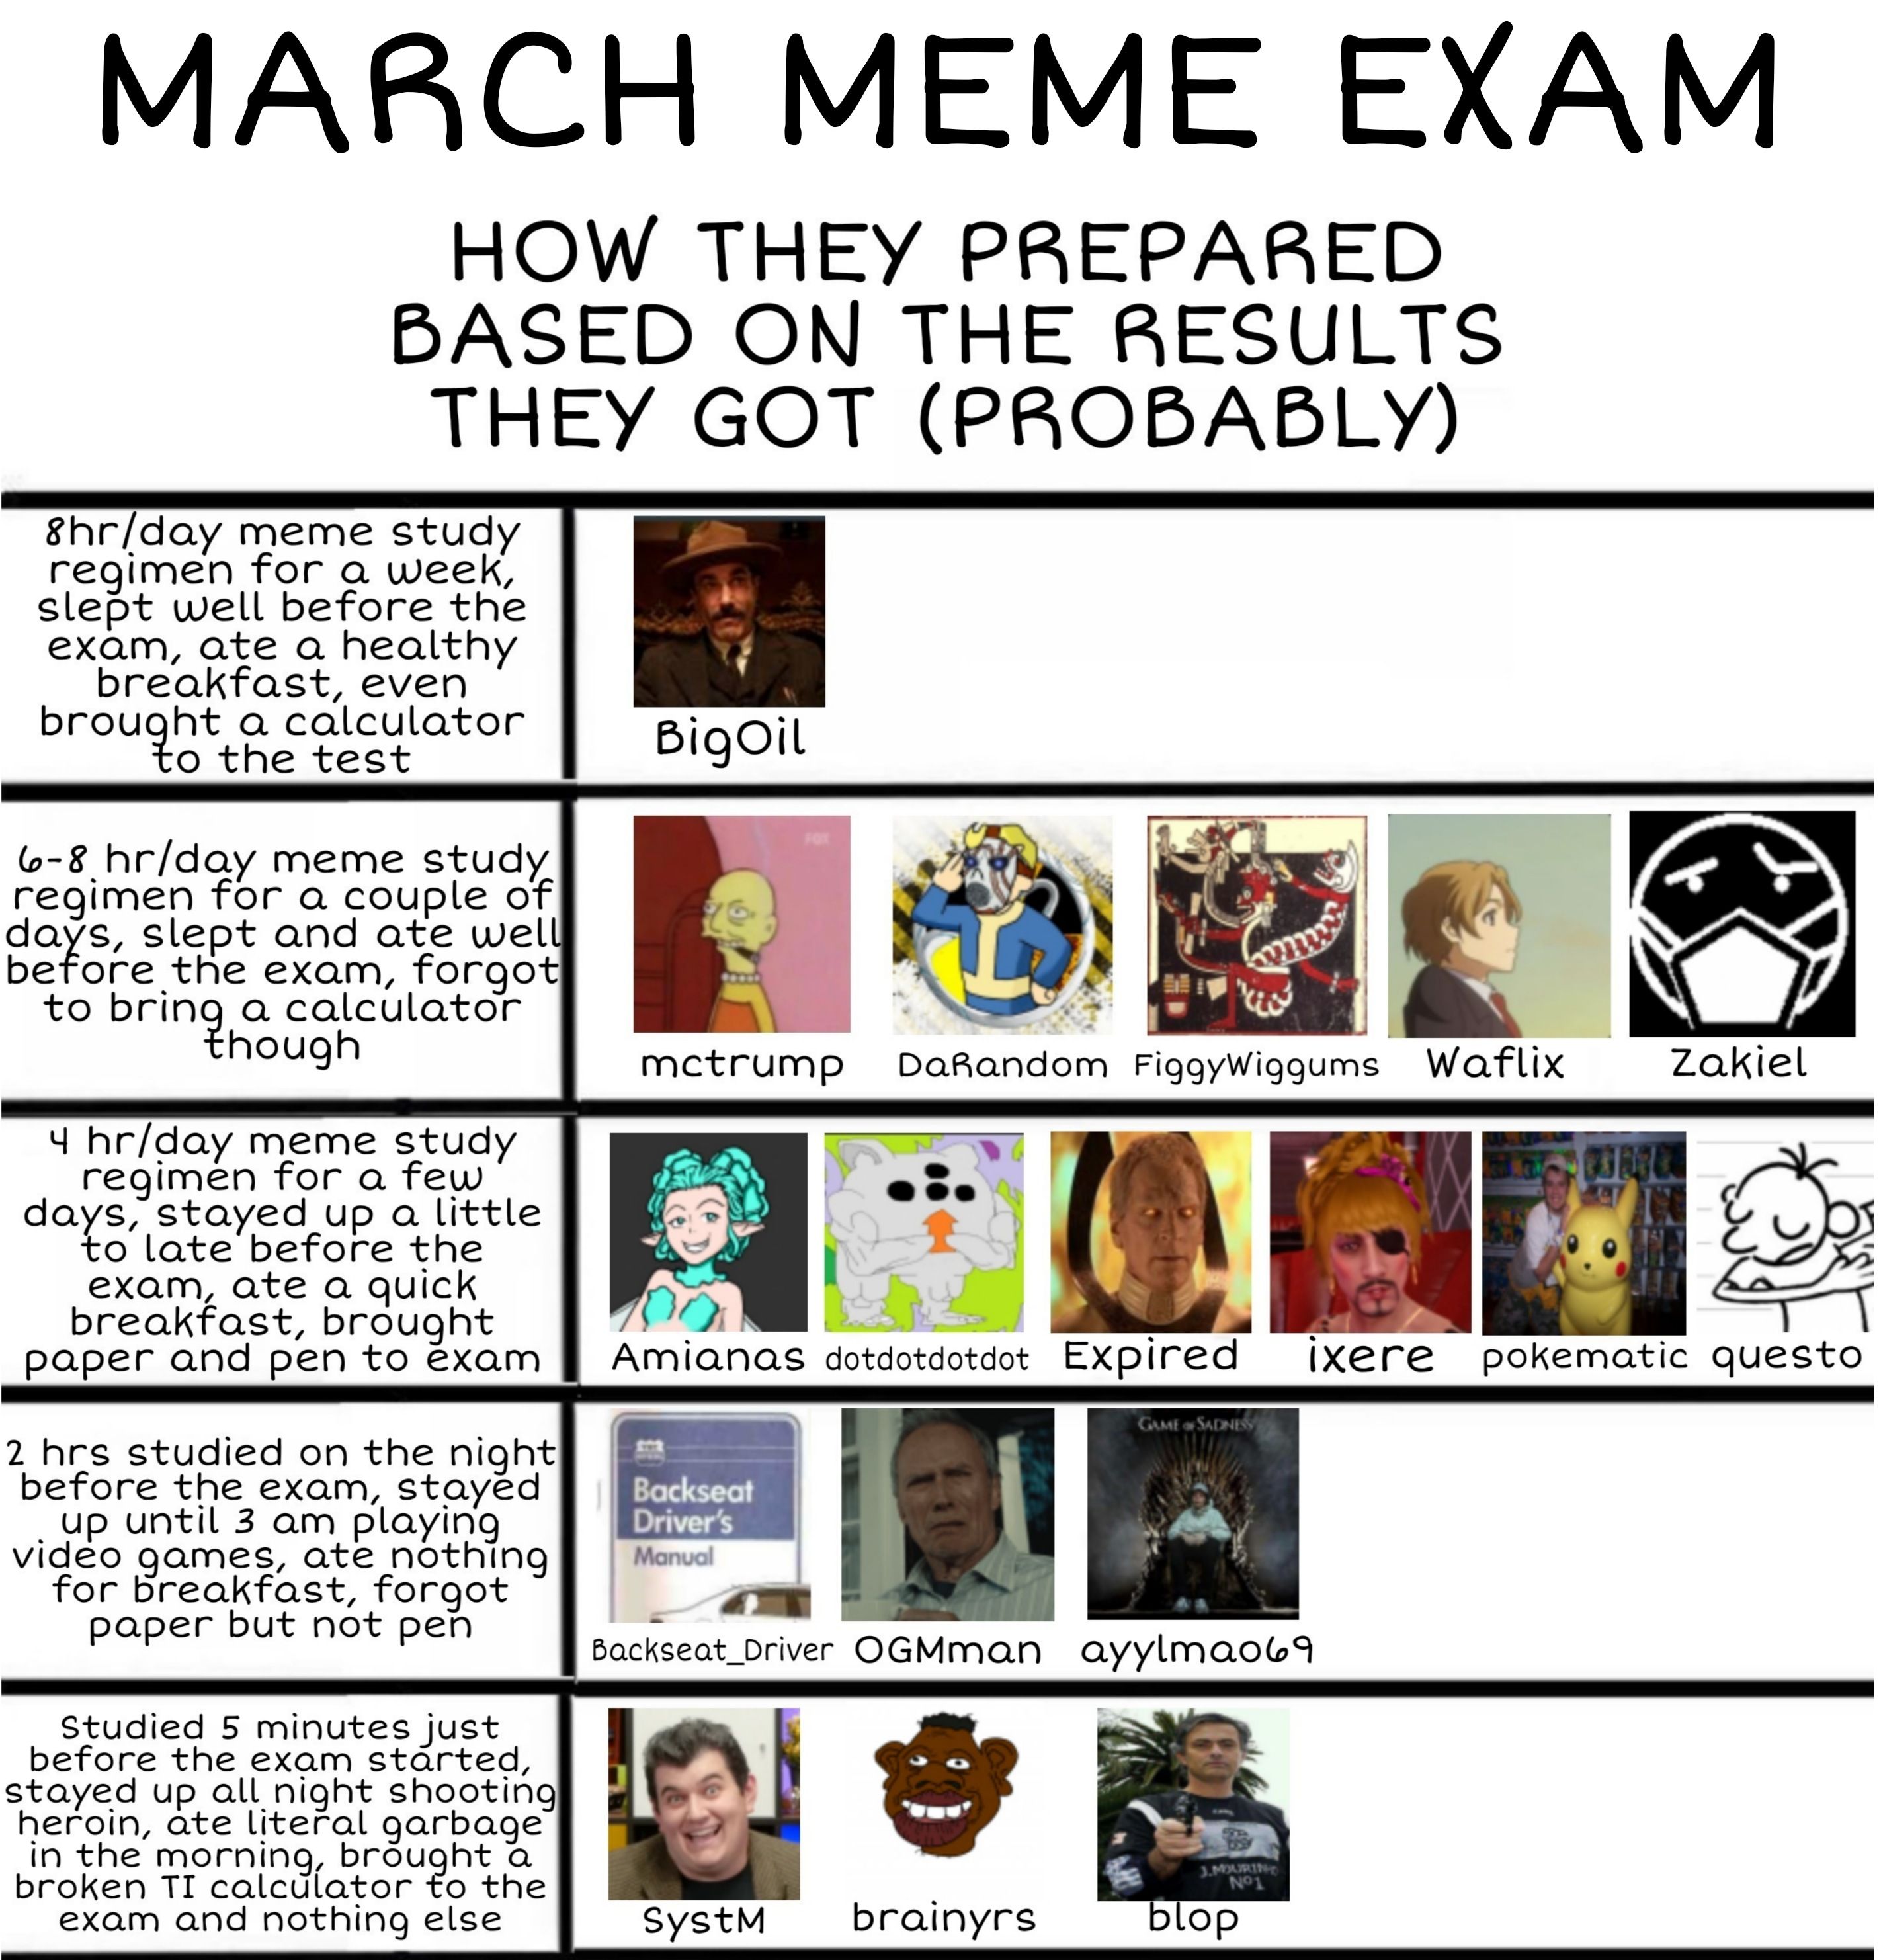 March meme exam results are here! Congrats to BigOil being Top Student. Grades are in the comments